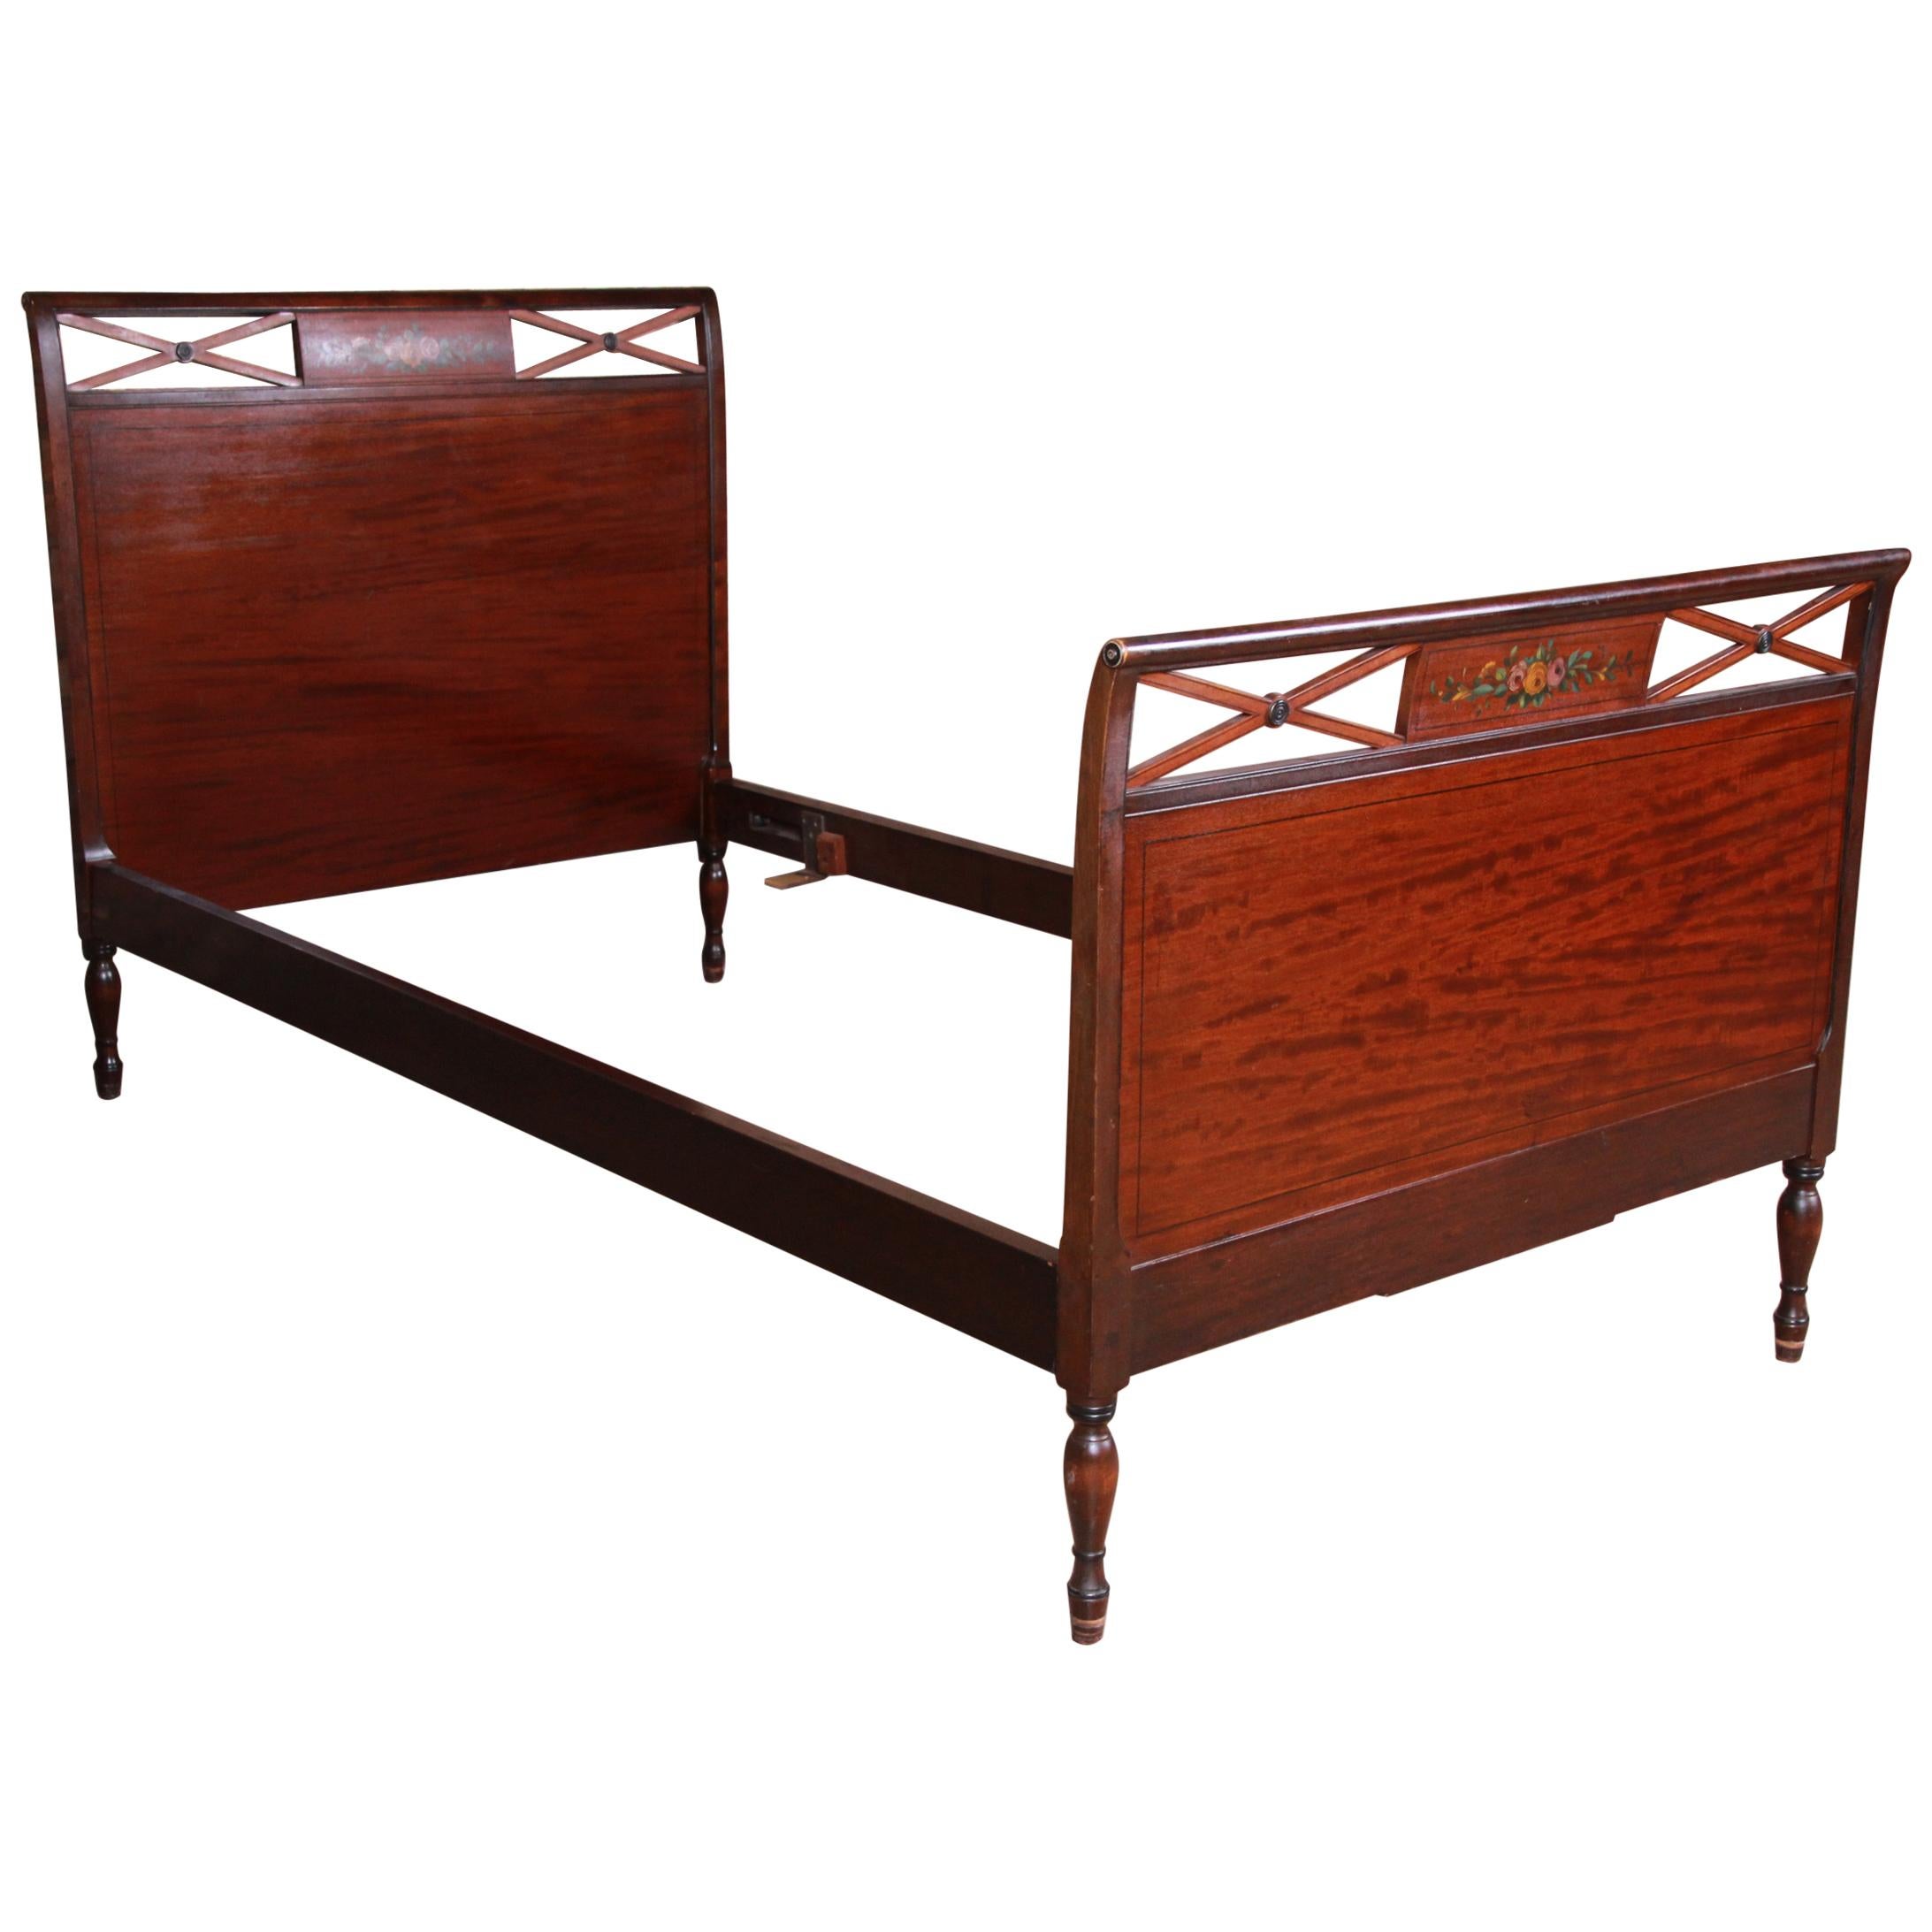 Antique Widdicomb Carved Mahogany Twin Size Bed, circa 1920s